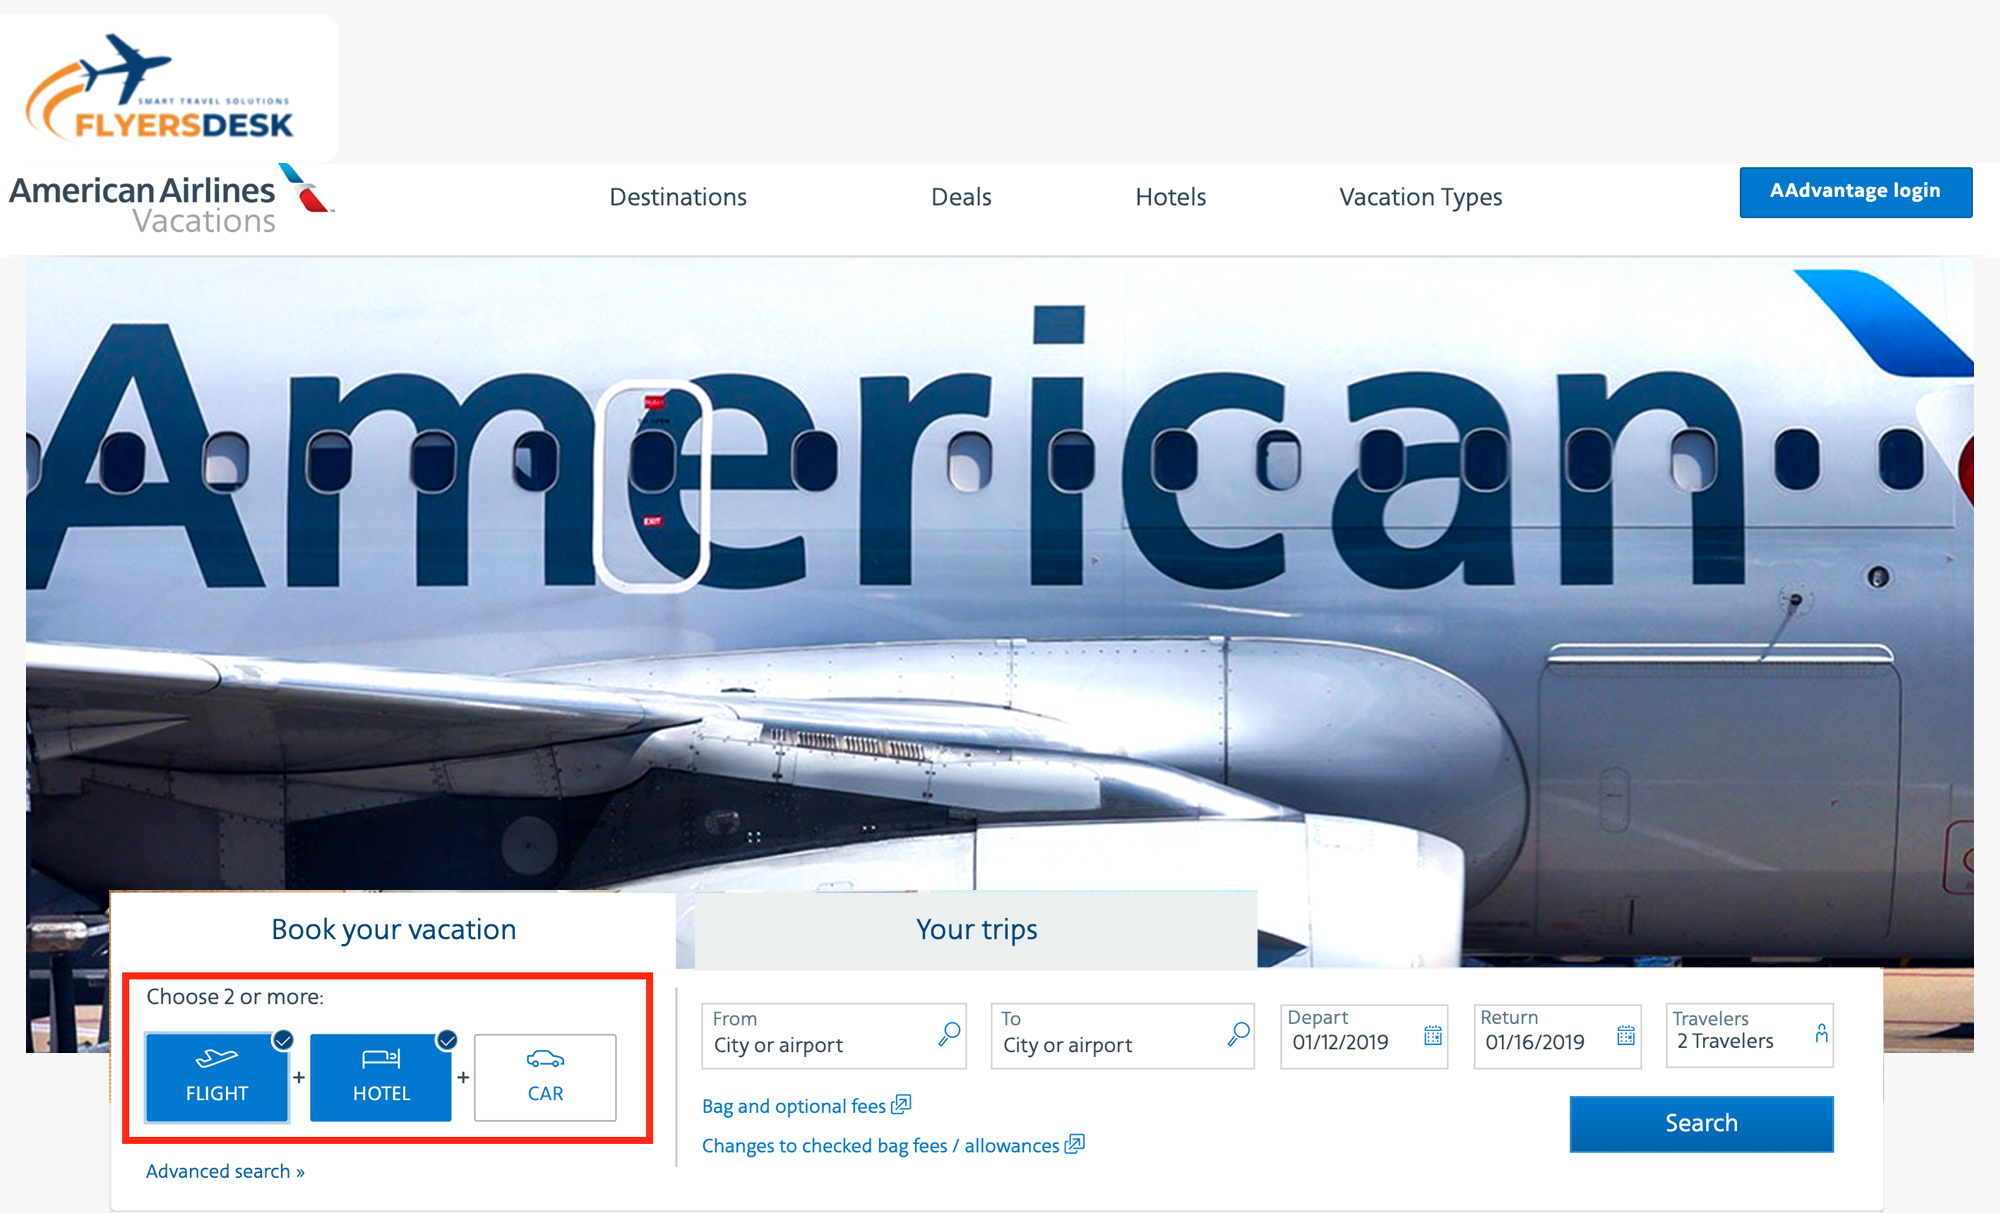 How to Book American Airlines Vacation Packages